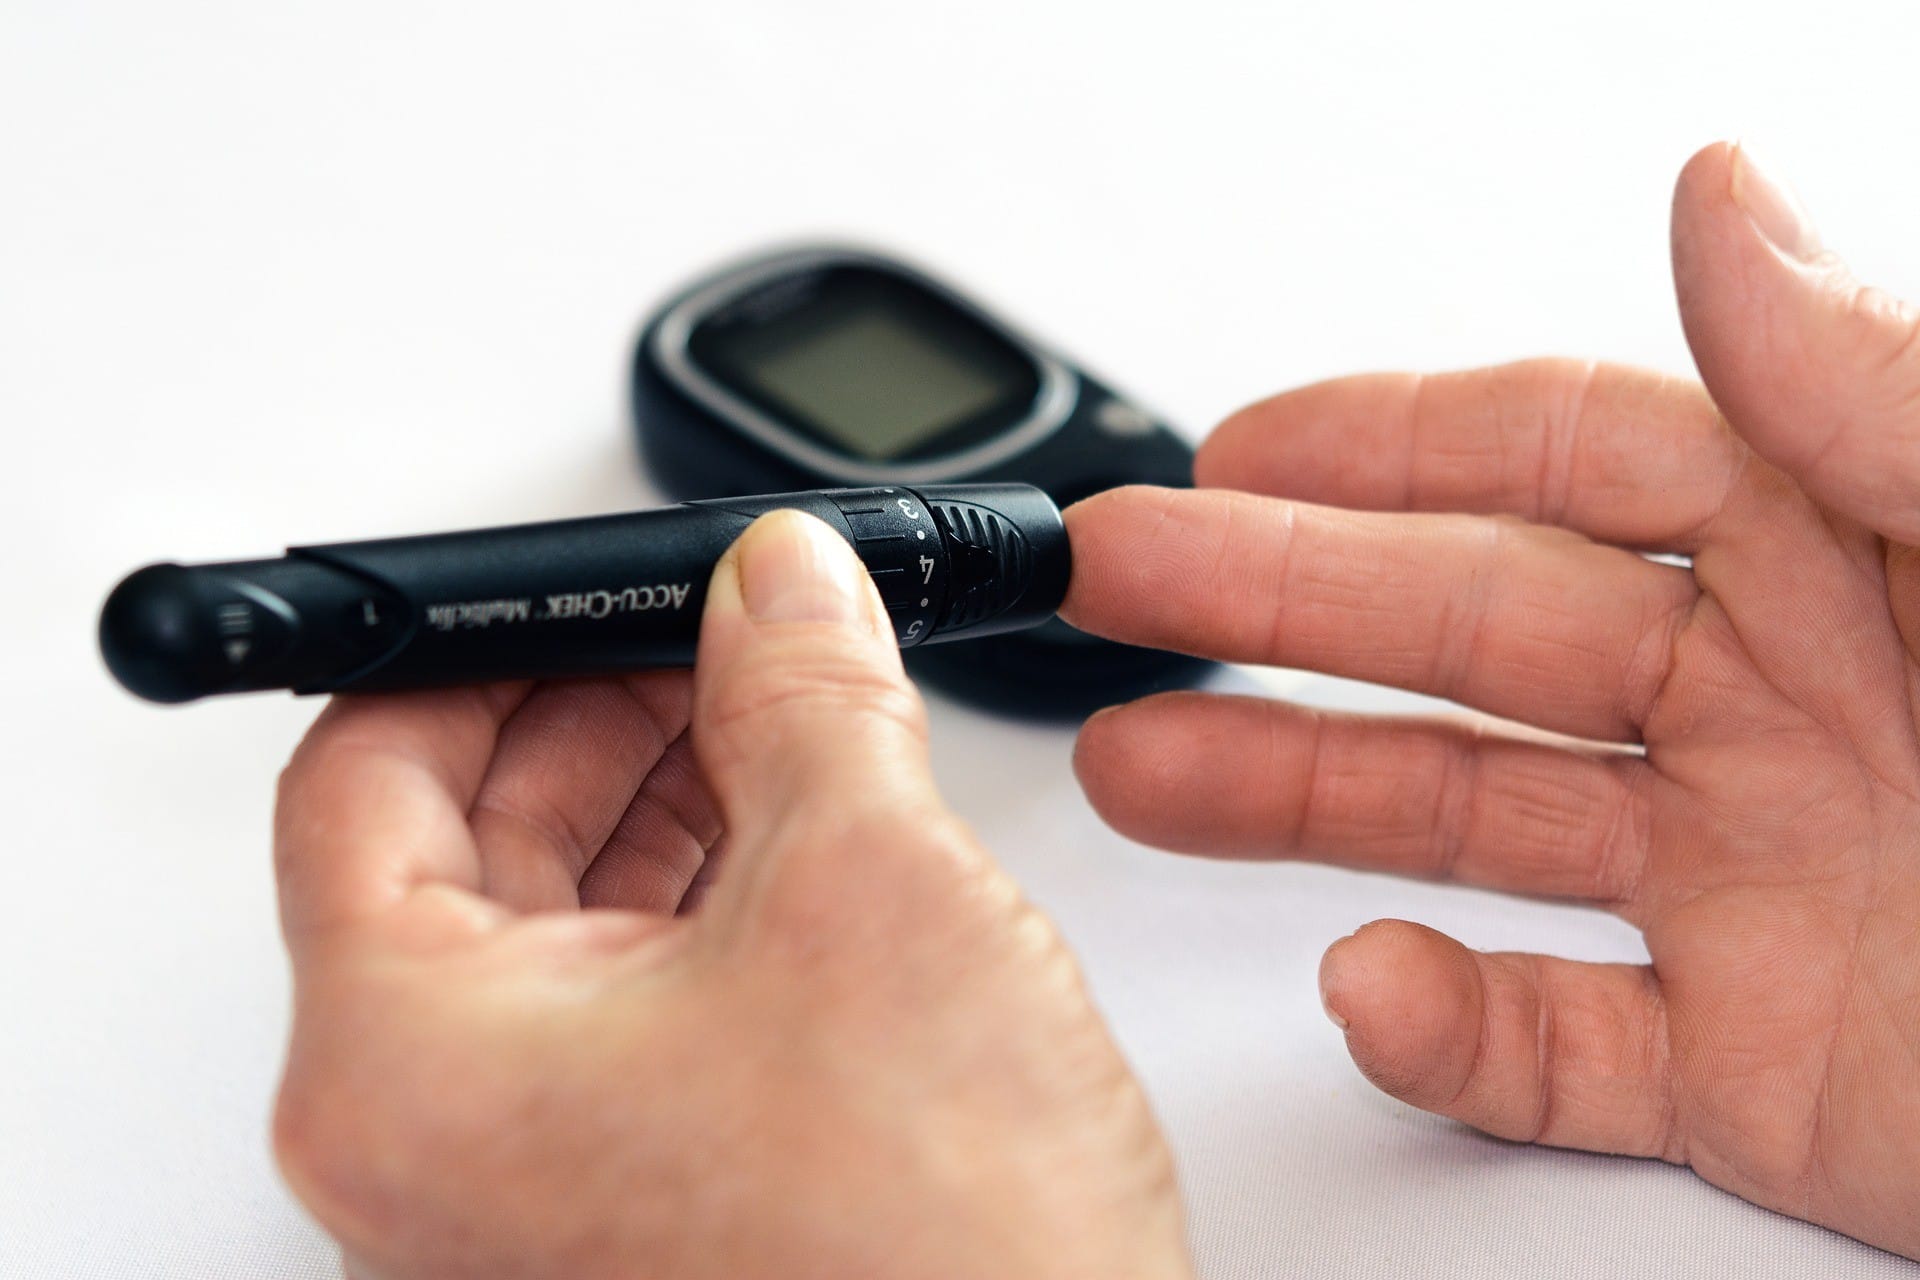 Diabetic male pricking his fingertip with a needle to check blood sugar levels